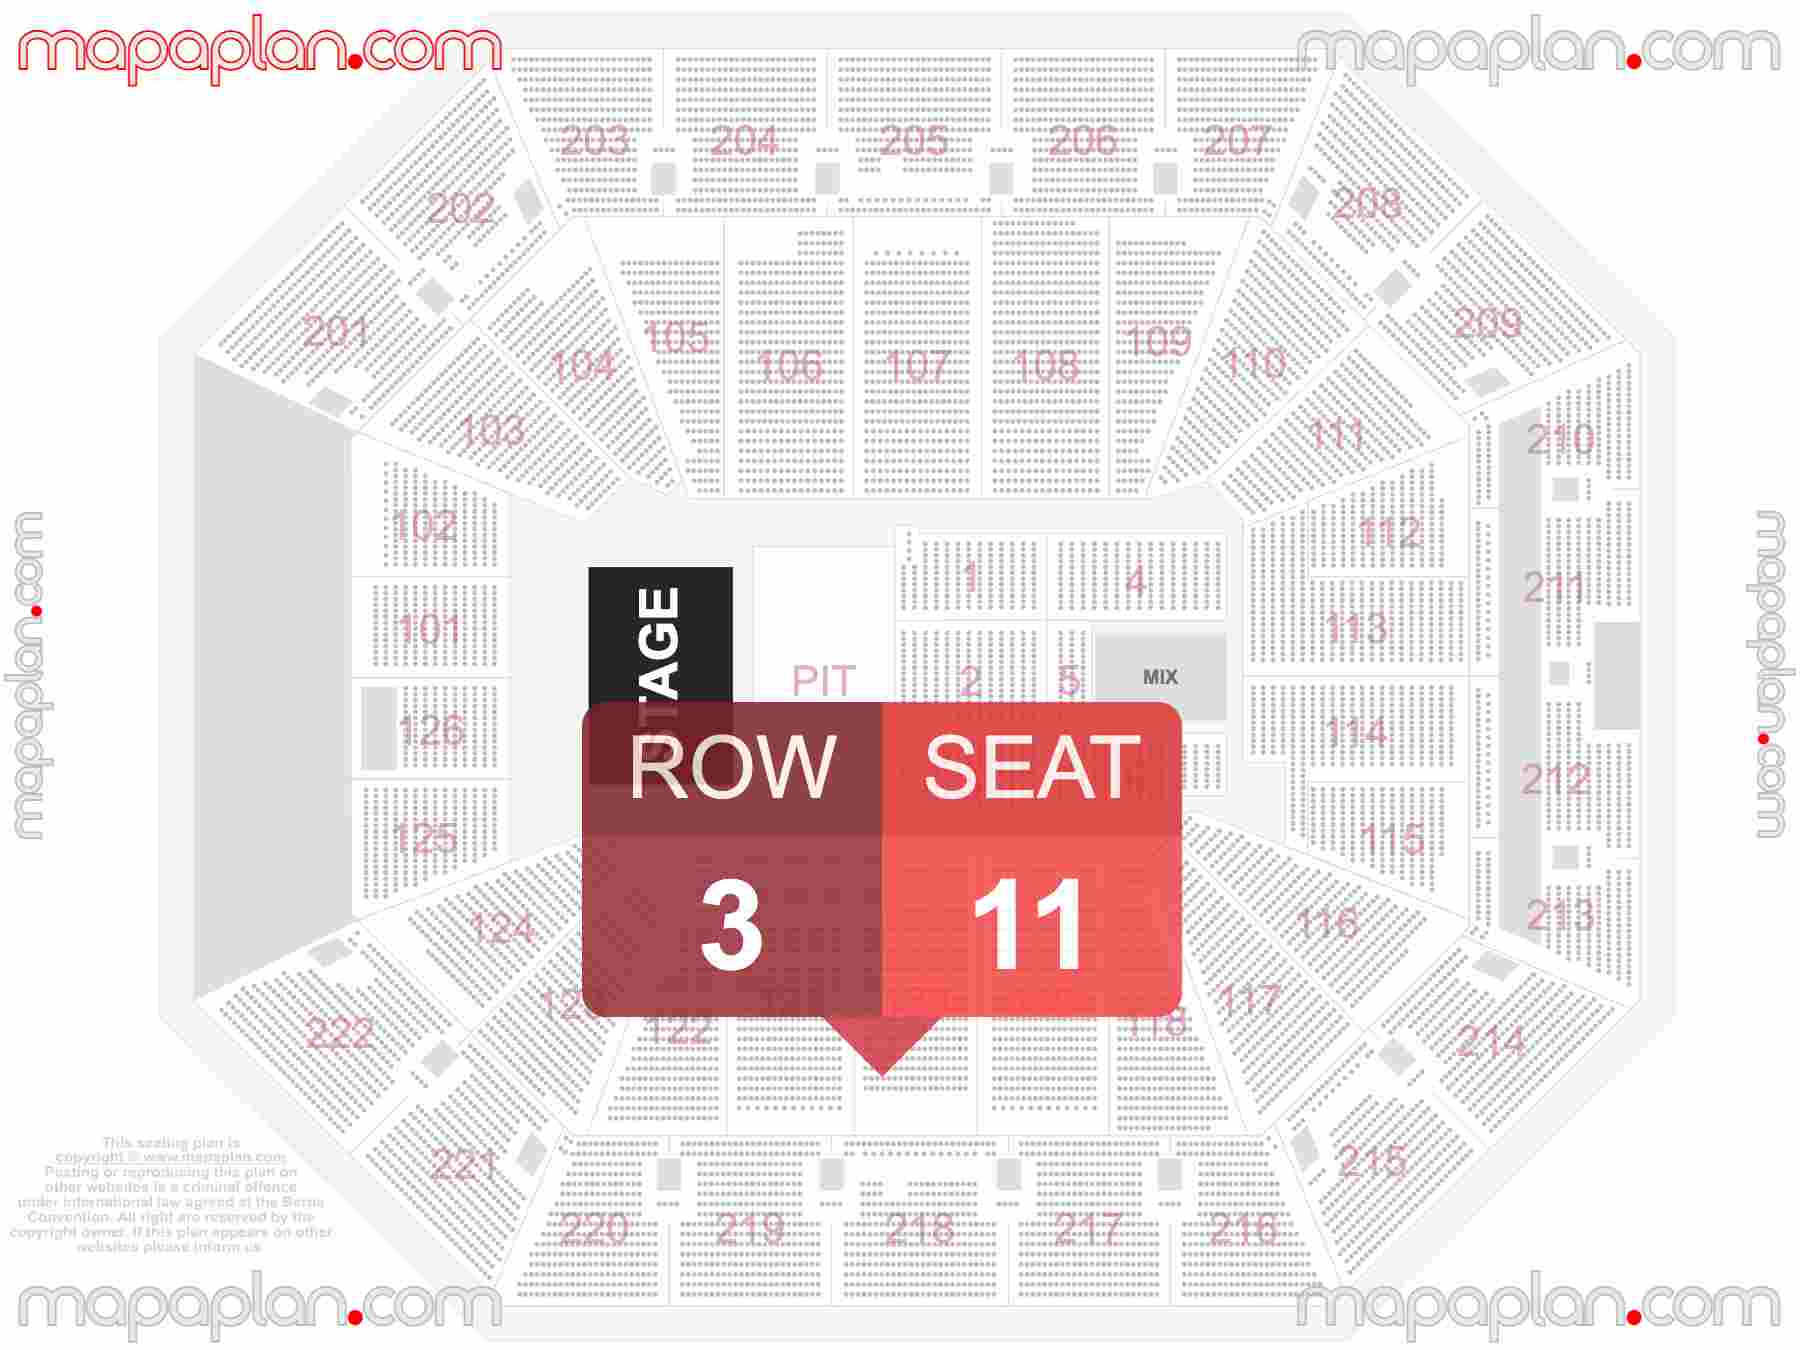 Sacramento Golden 1 Center seating chart Concert with PIT floor standing interactive seating checker map plan showing seat numbers per row - Ticket prices sections review diagram